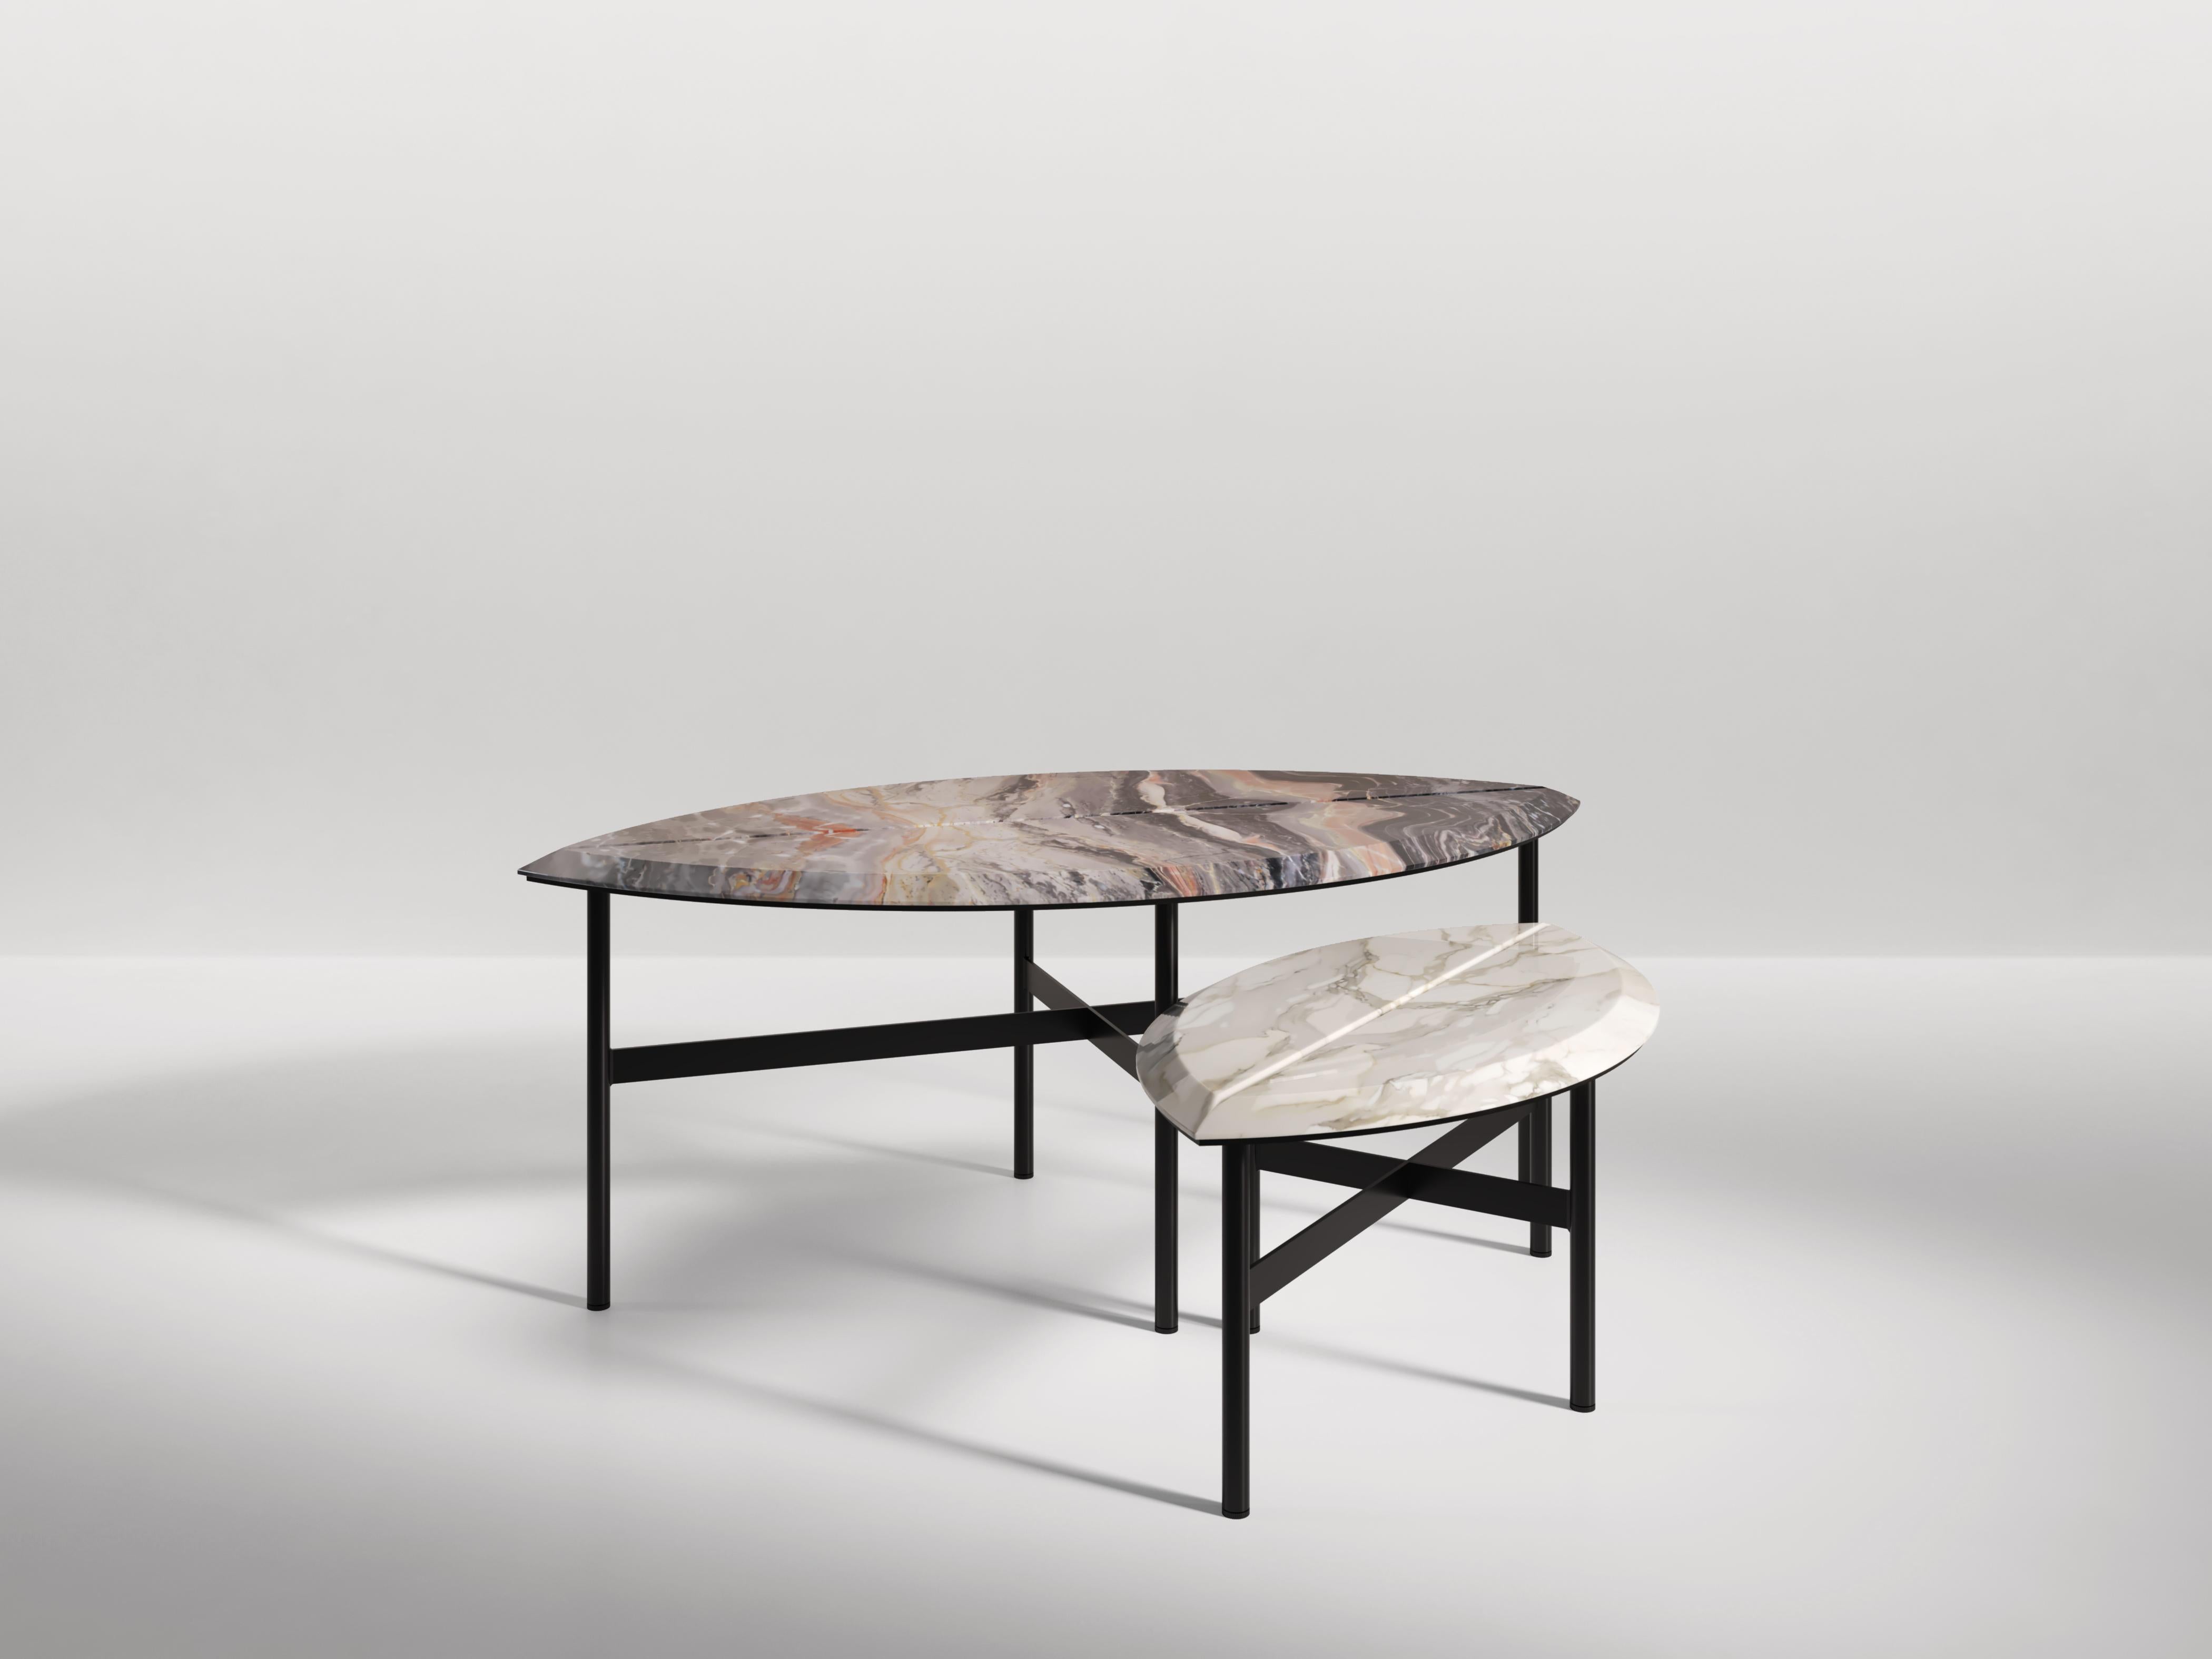 Two sizes of coffee table in the shape of two giant leaves. The veins of the book-matched marble mirror the veins of a leaf. Available in various marbles and natural stones as well as different metal finishes.

Dimension:
Book 1: 105cm x 55cm